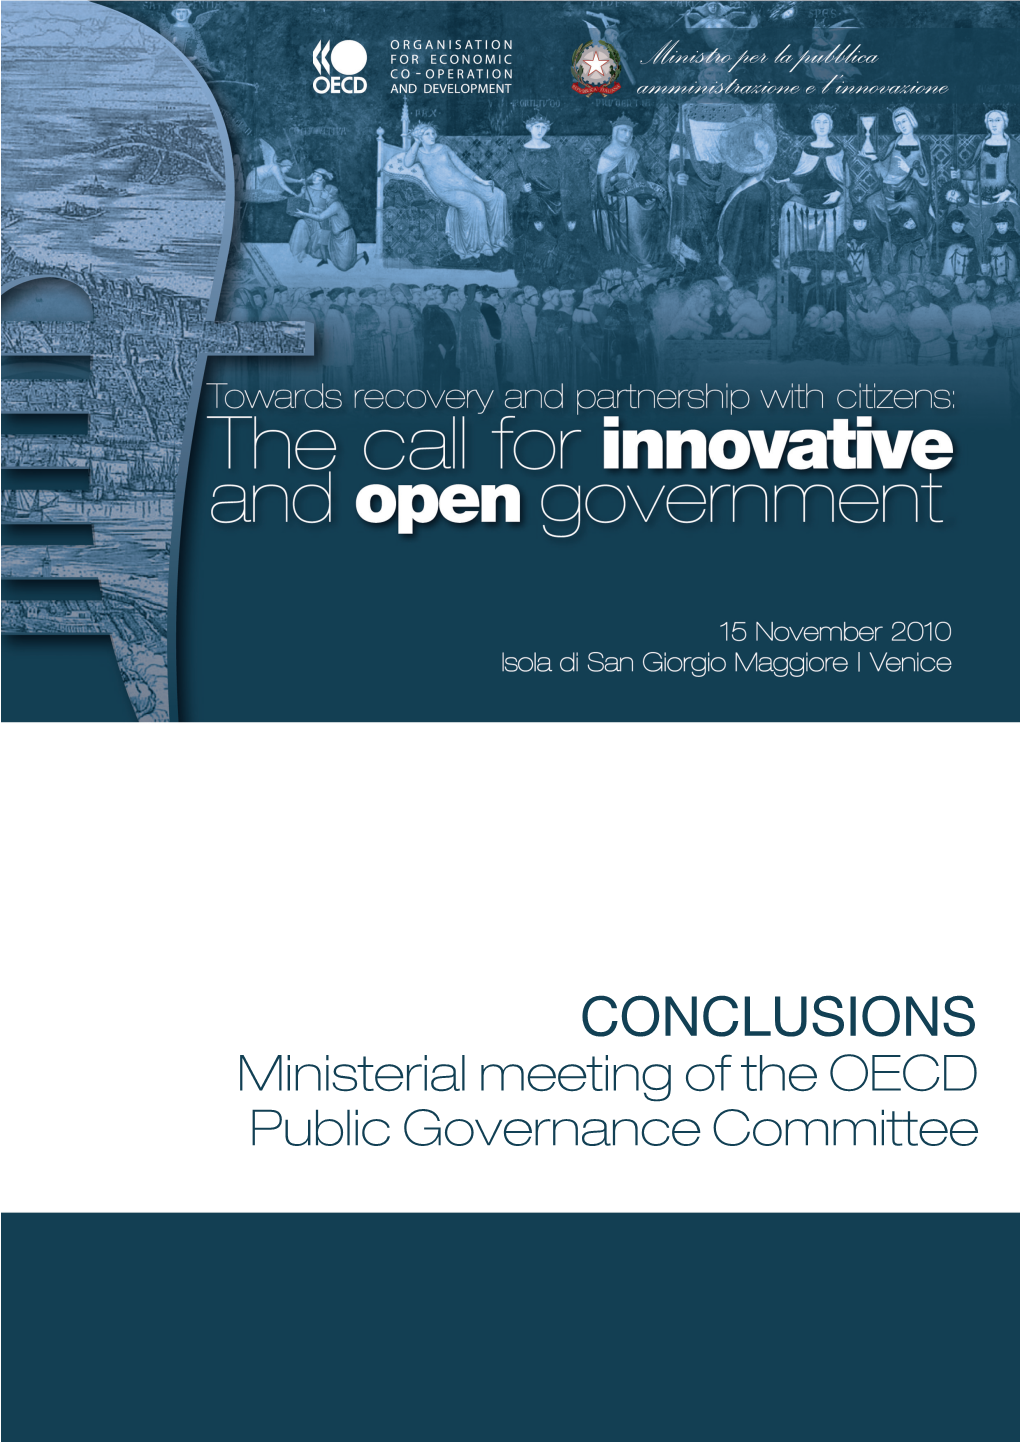 CONCLUSIONS Ministerial Meeting of the OECD Public Governance Committee